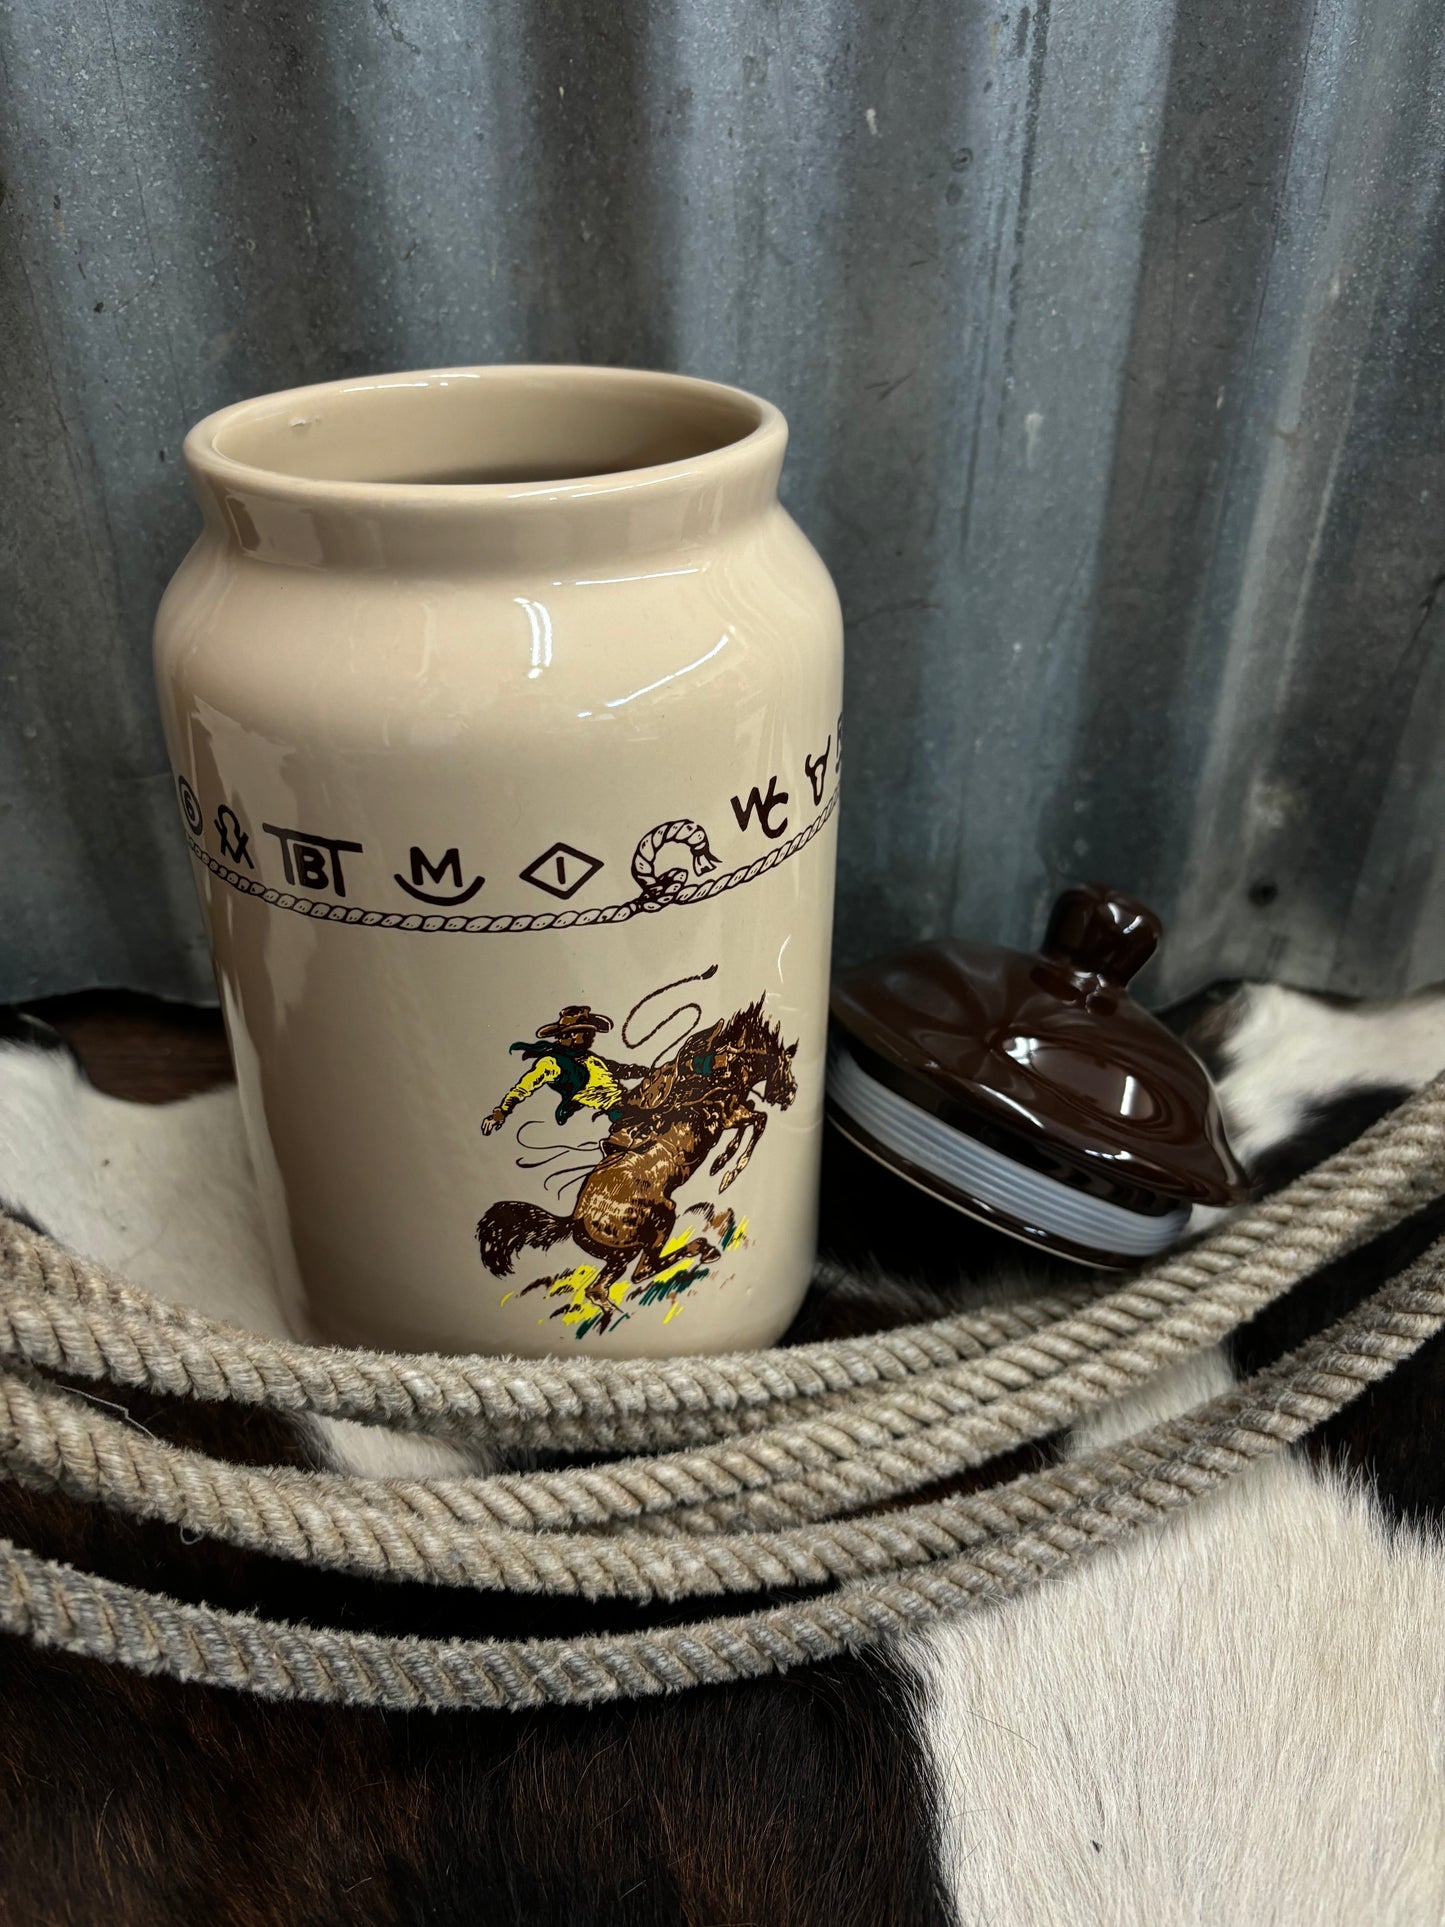 The Large Bronc Buster Canister